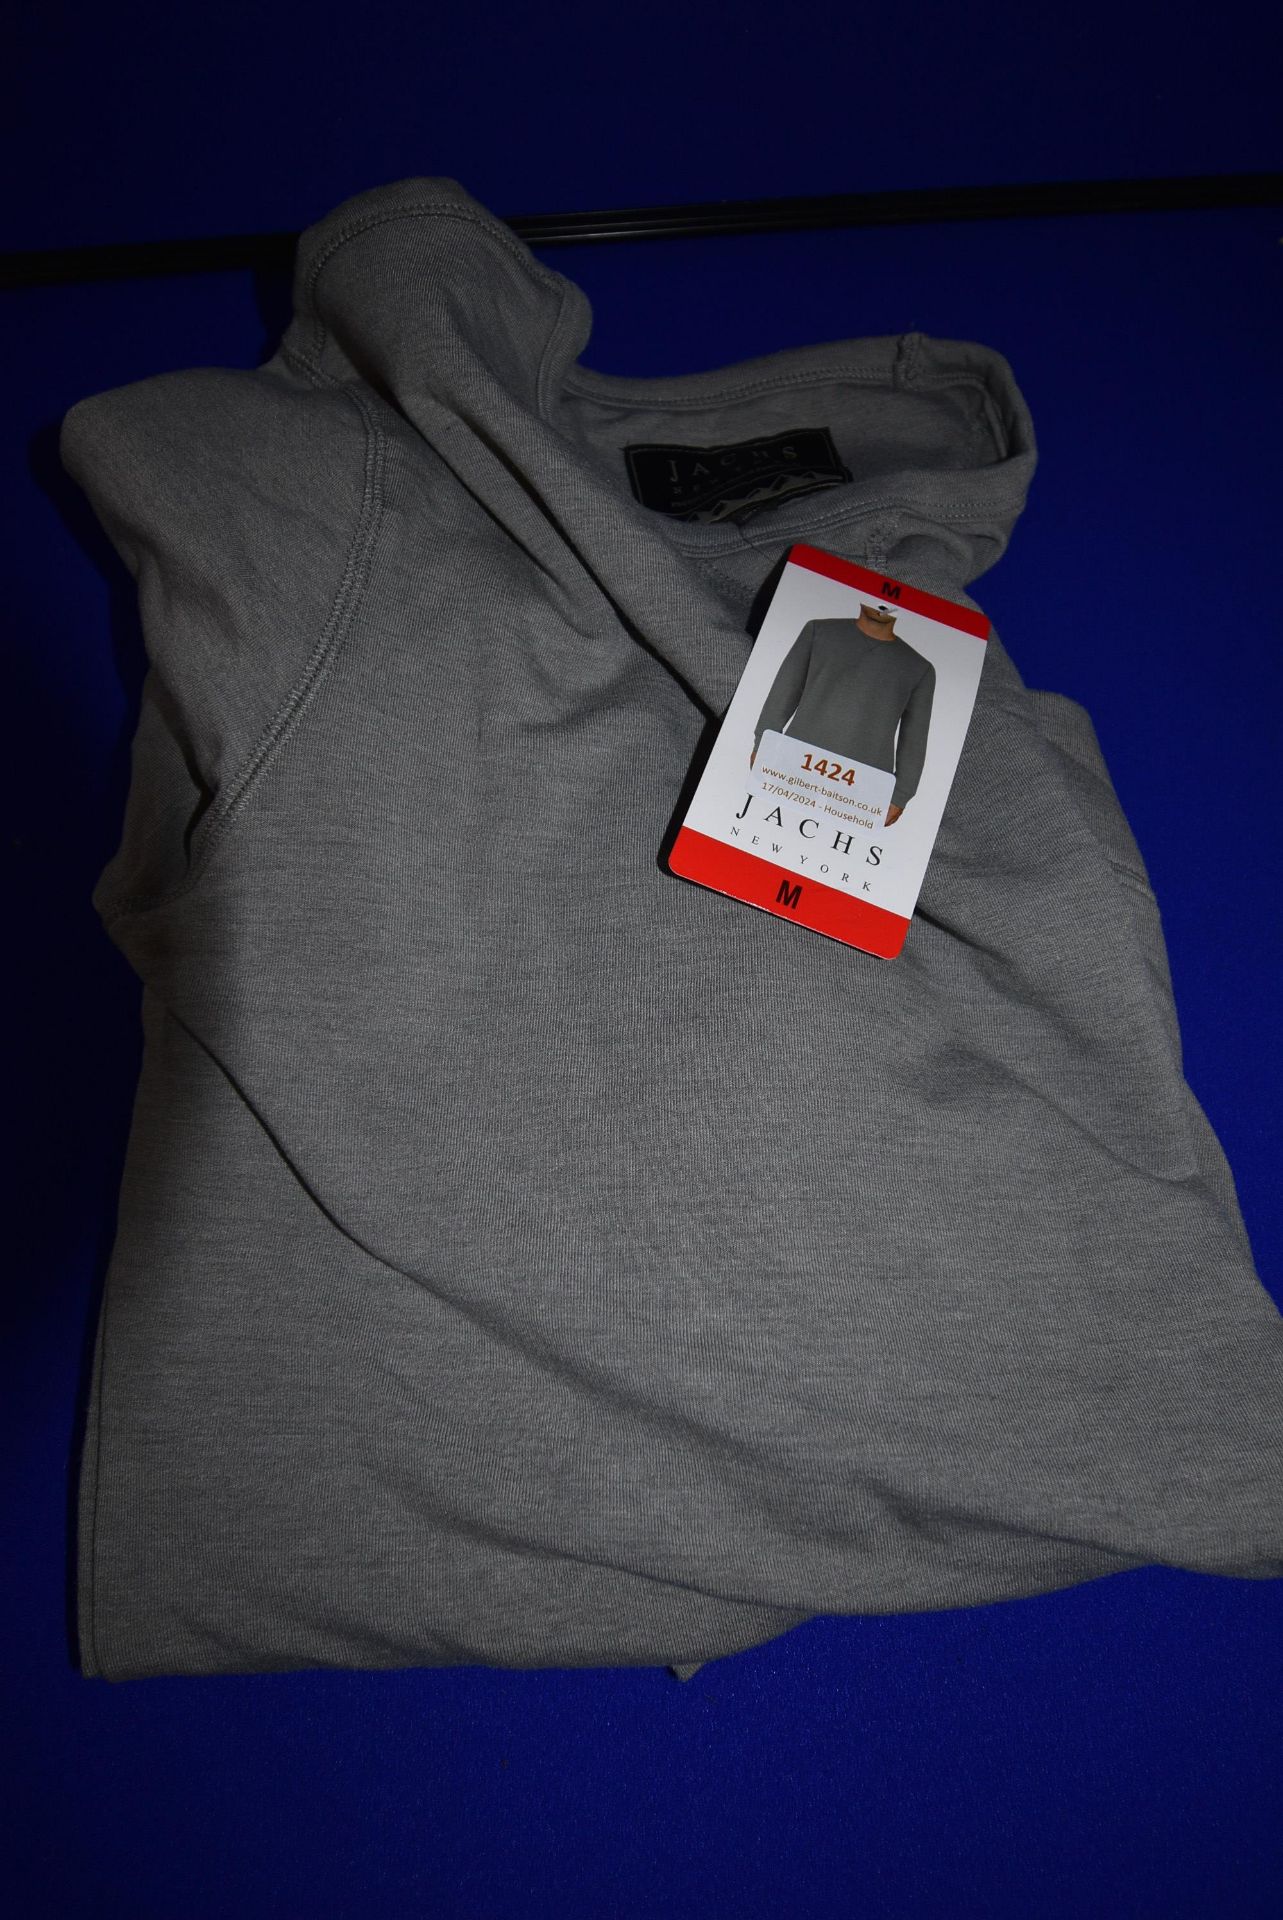 *Jachs of New York Grey Long Sleeve Top Size: M